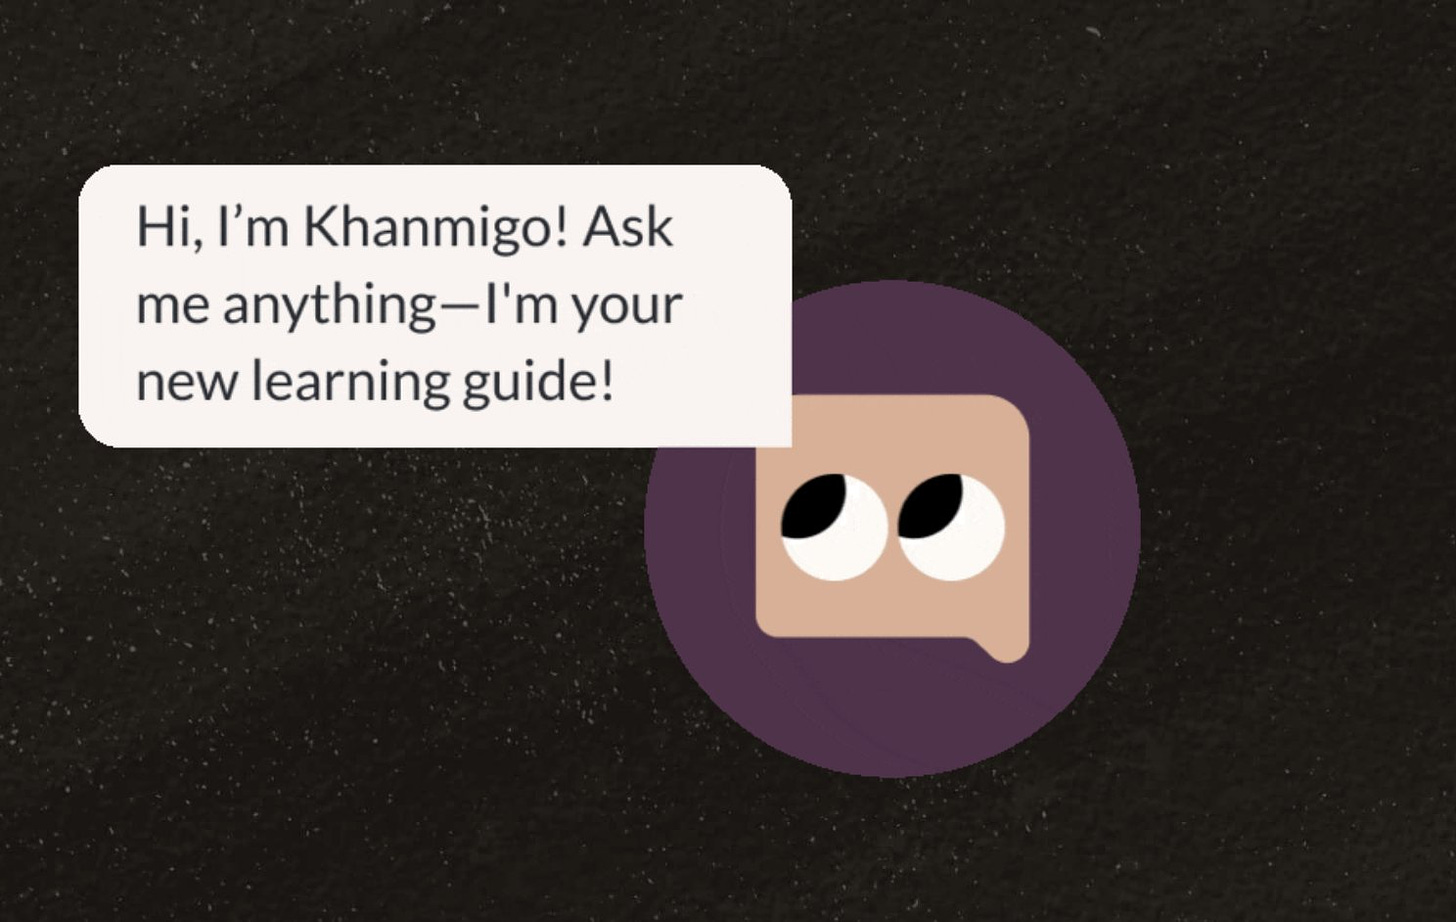 Dr Gaurav Garg on Twitter: "Khan academy has launched AI Super tutor  Khanmigo. It seems in the future the AI will replace teachers. Would you  prefer to be taught by bots instead